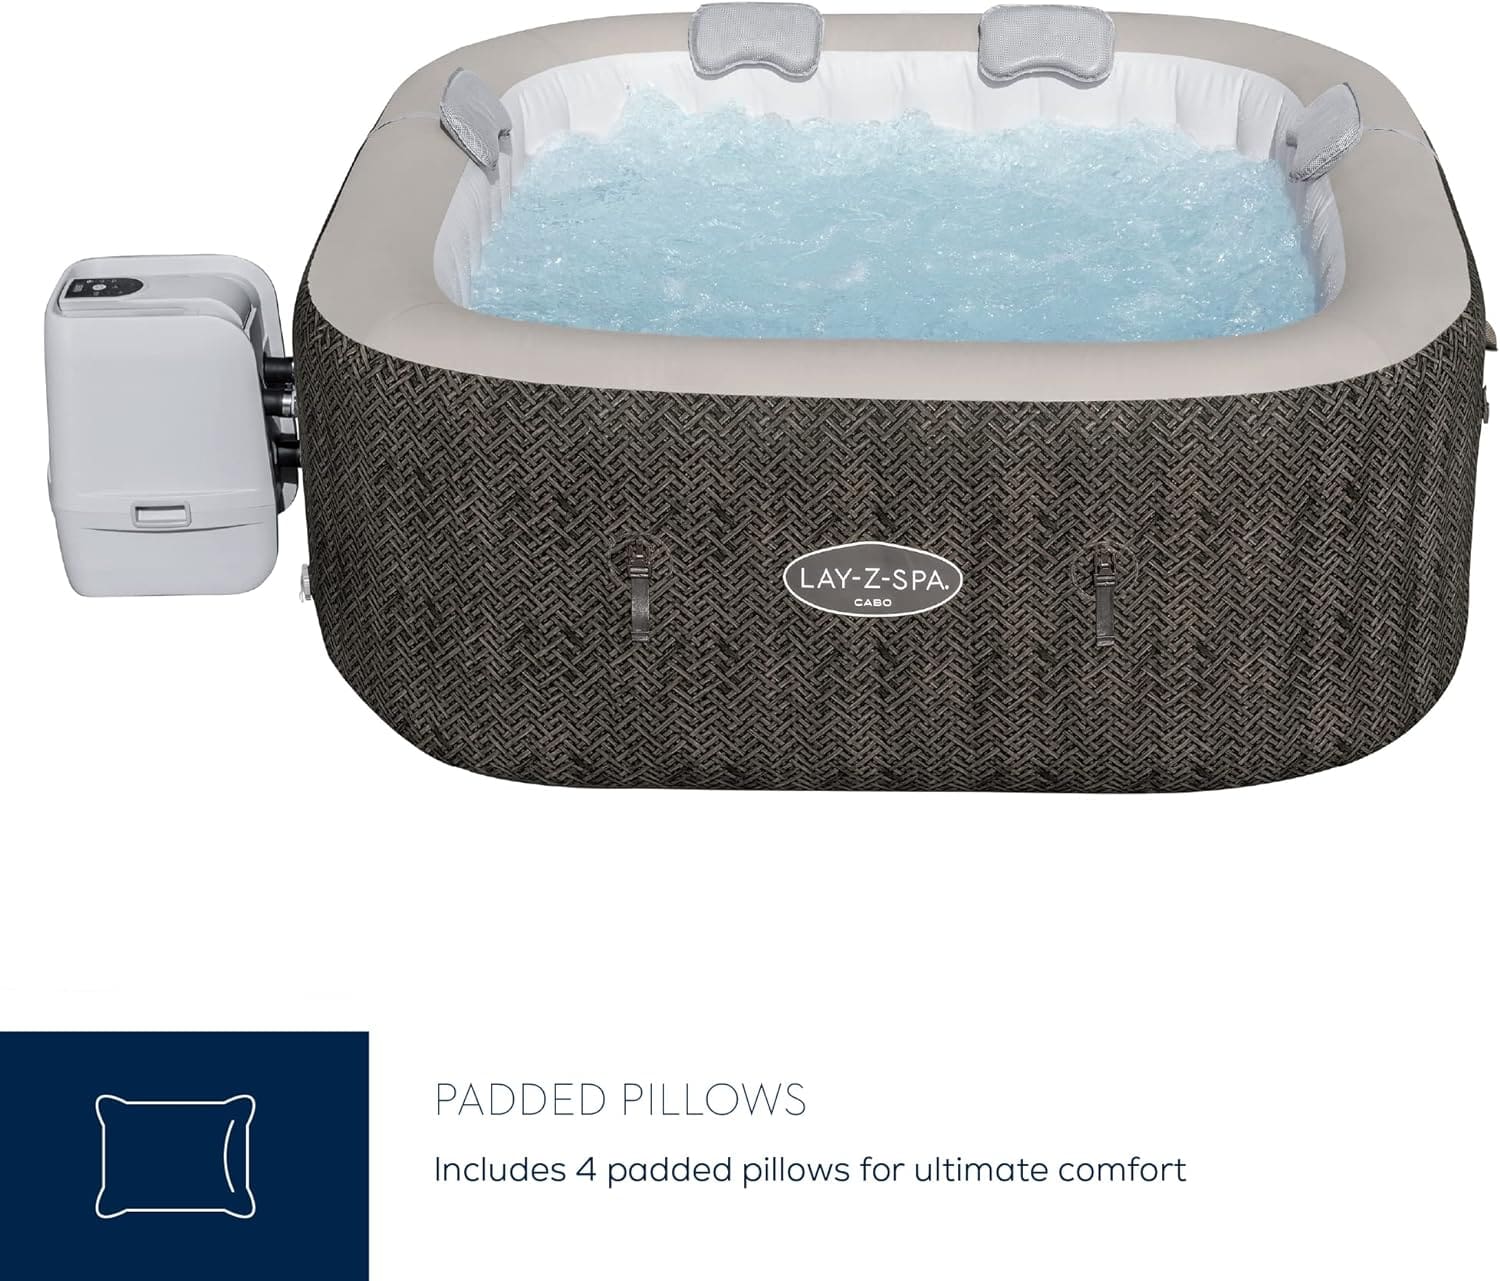 Lay-Z-spa Cabo Hydrojet Hot Tub - Deals